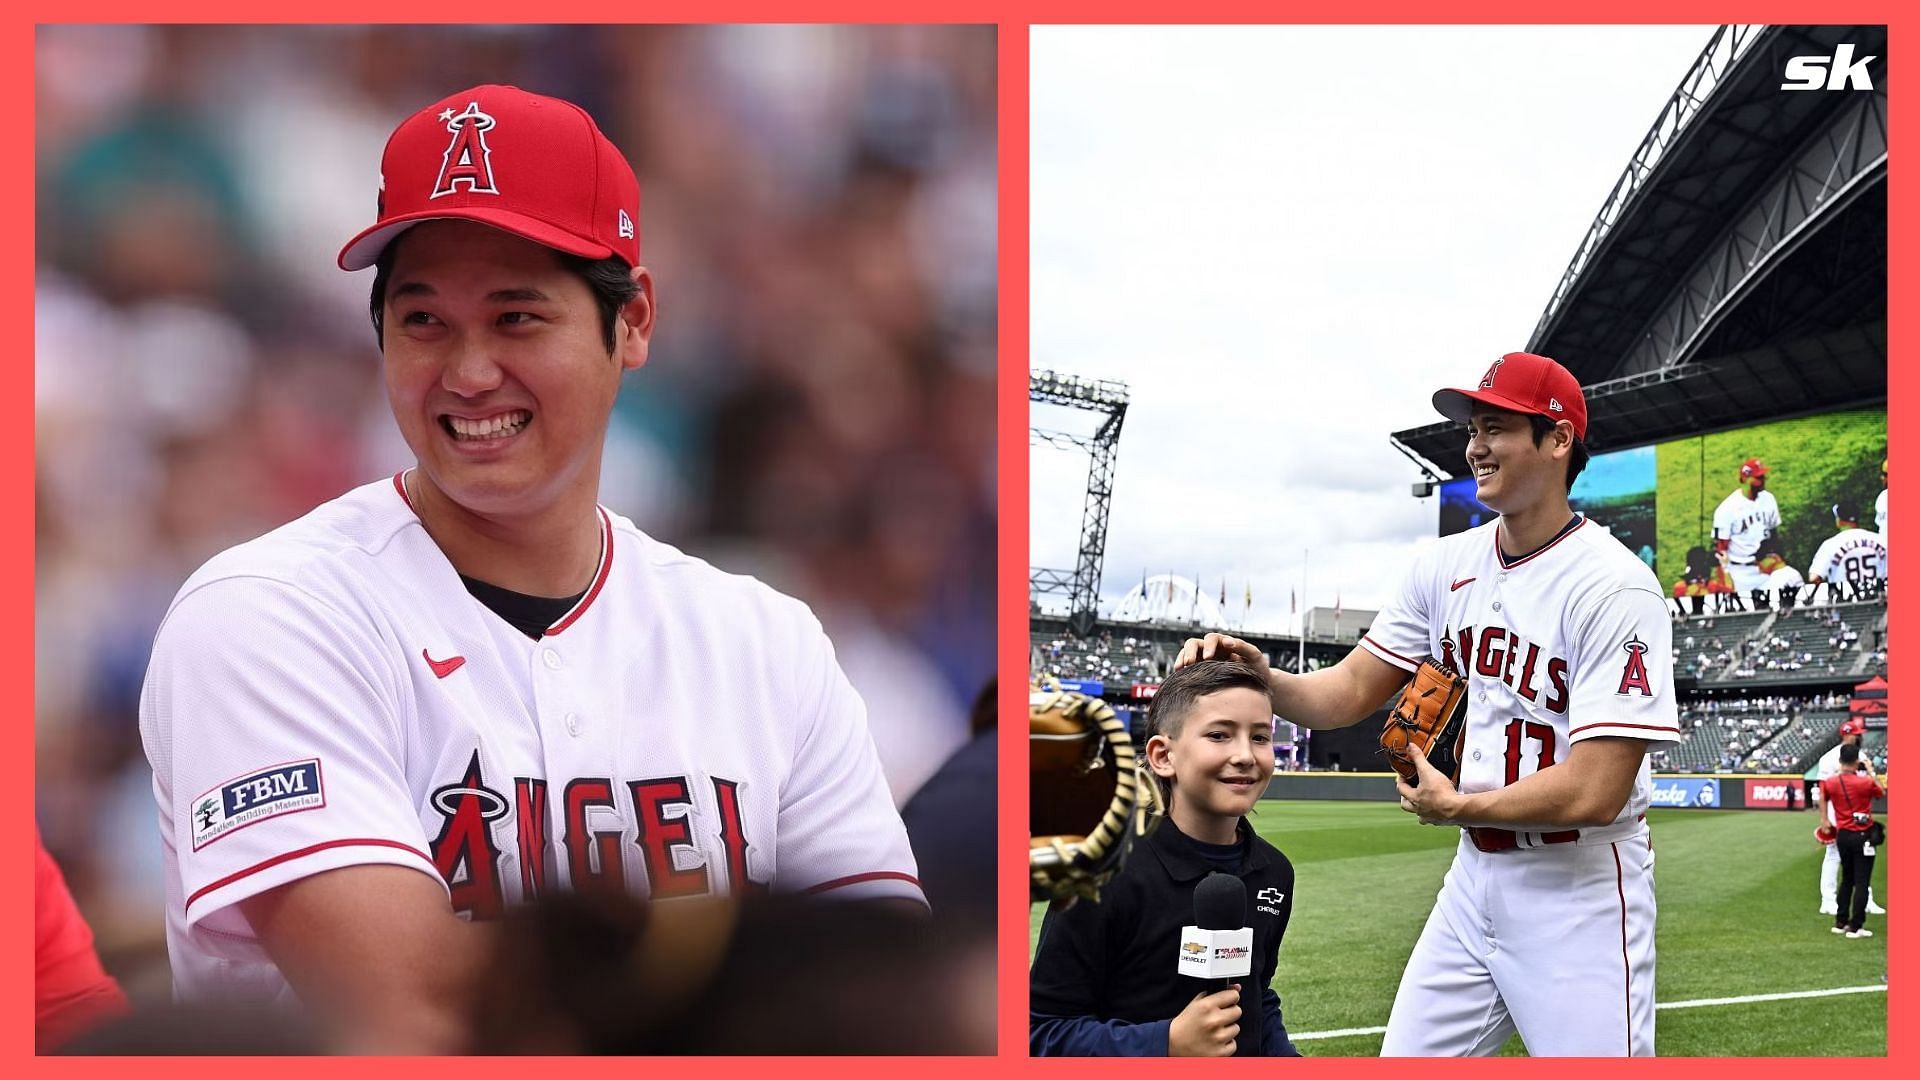 Come to Seattle': Mariners fans shower Shohei Ohtani with love